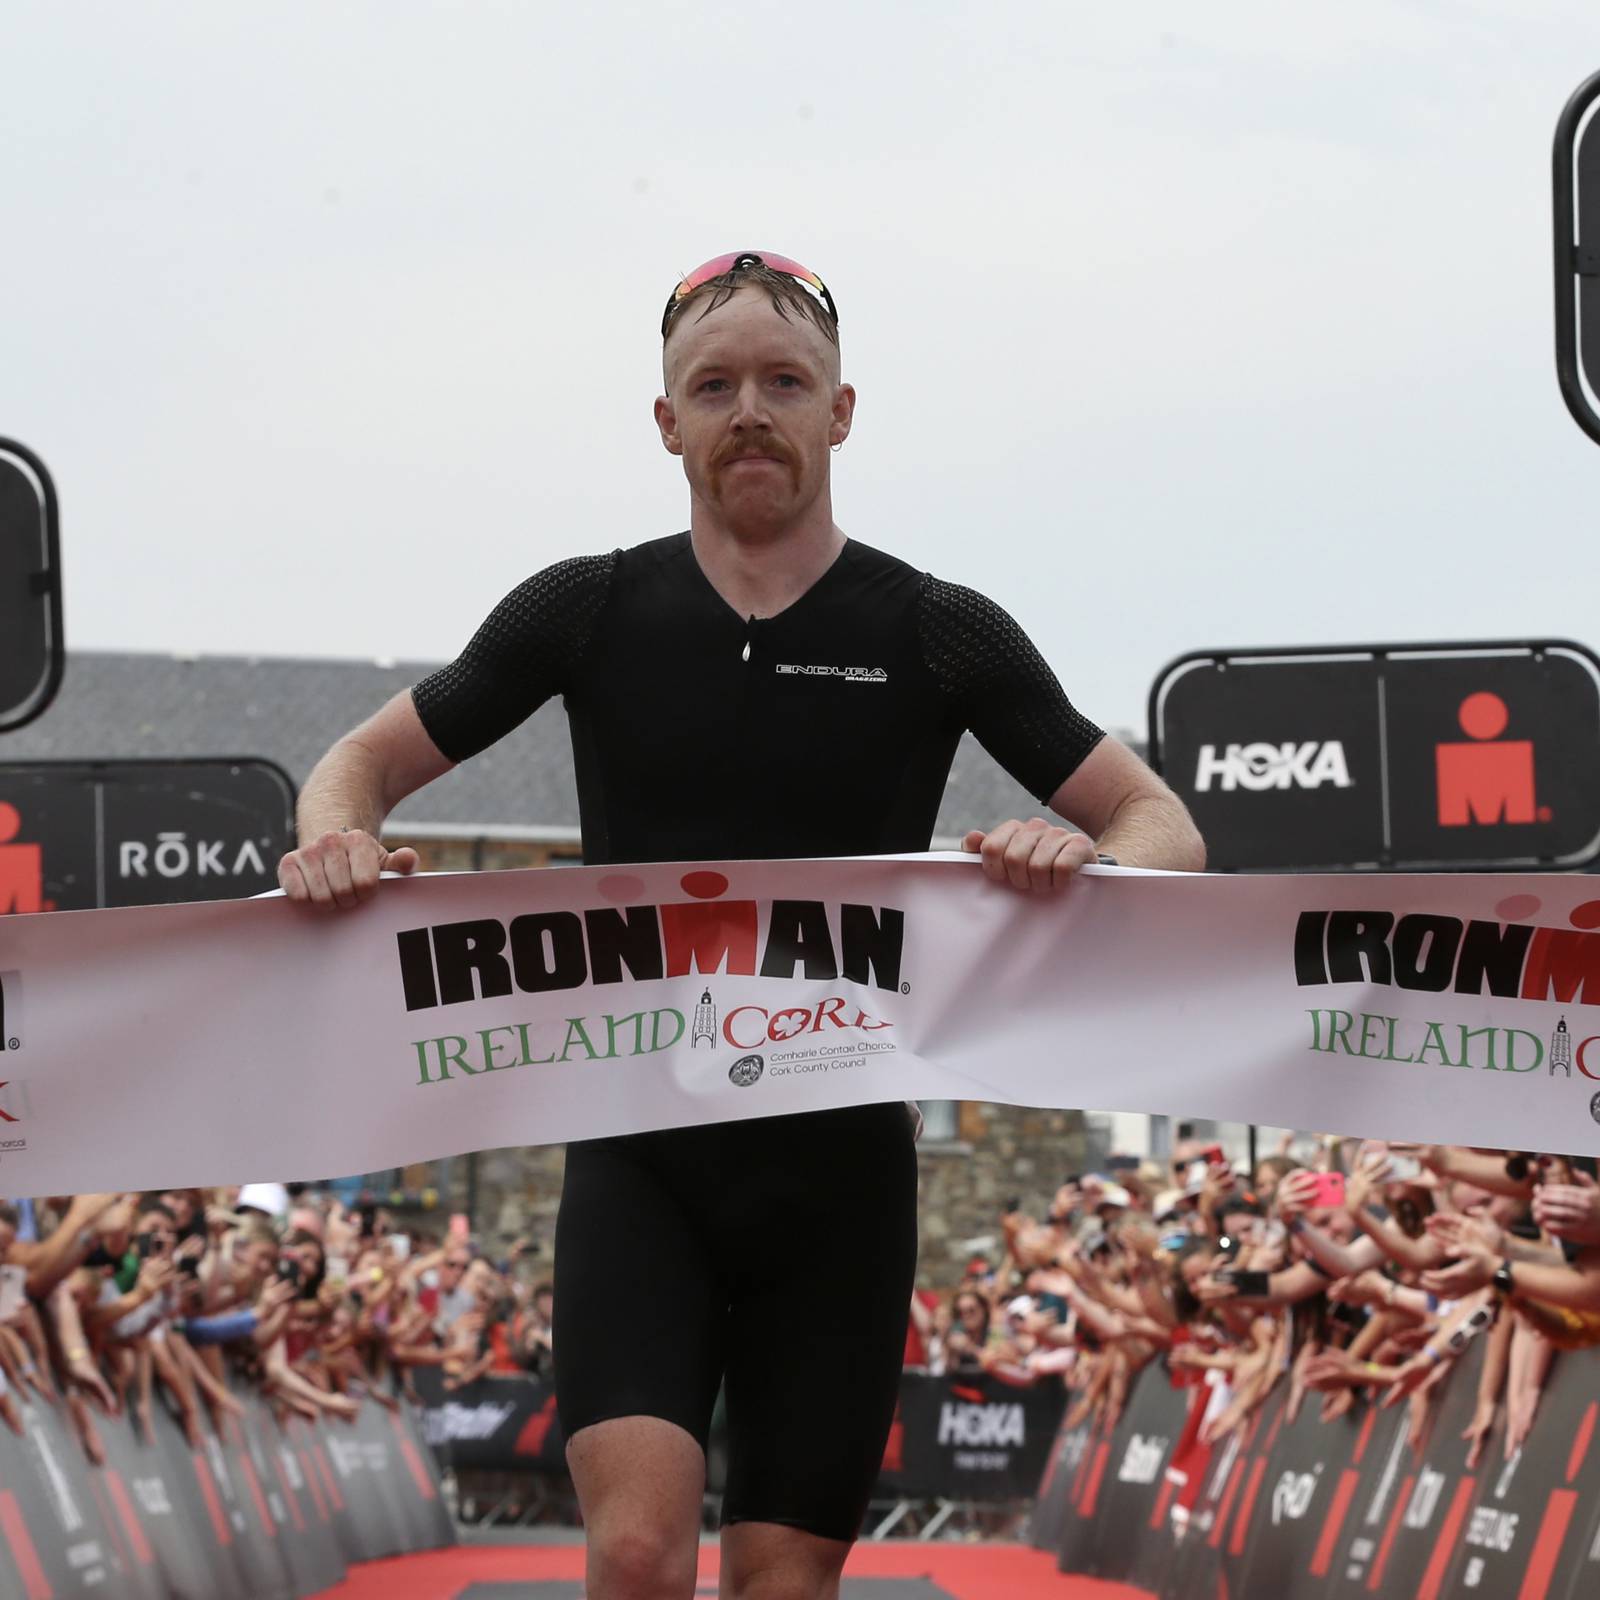 Cork man first across finish line at Youghal Ironman competition – The  Irish Times